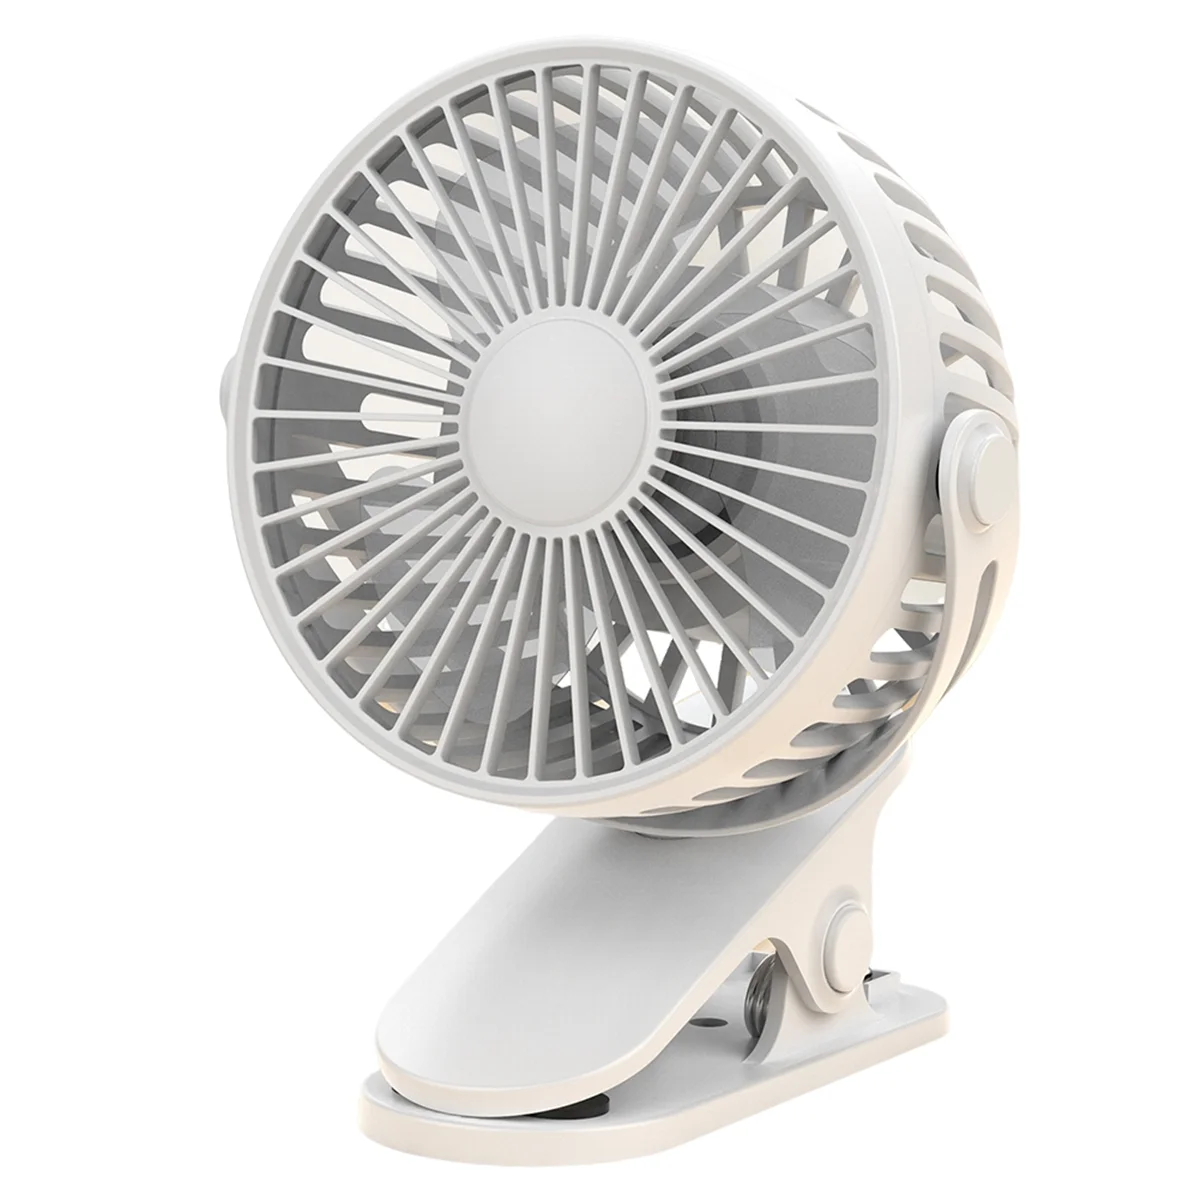 

Clip on Fan Usb Charging Outdoor Portable Student Dormitory Rotating Silent 3-Speed Adjustable Fan for Bedroom Office,B